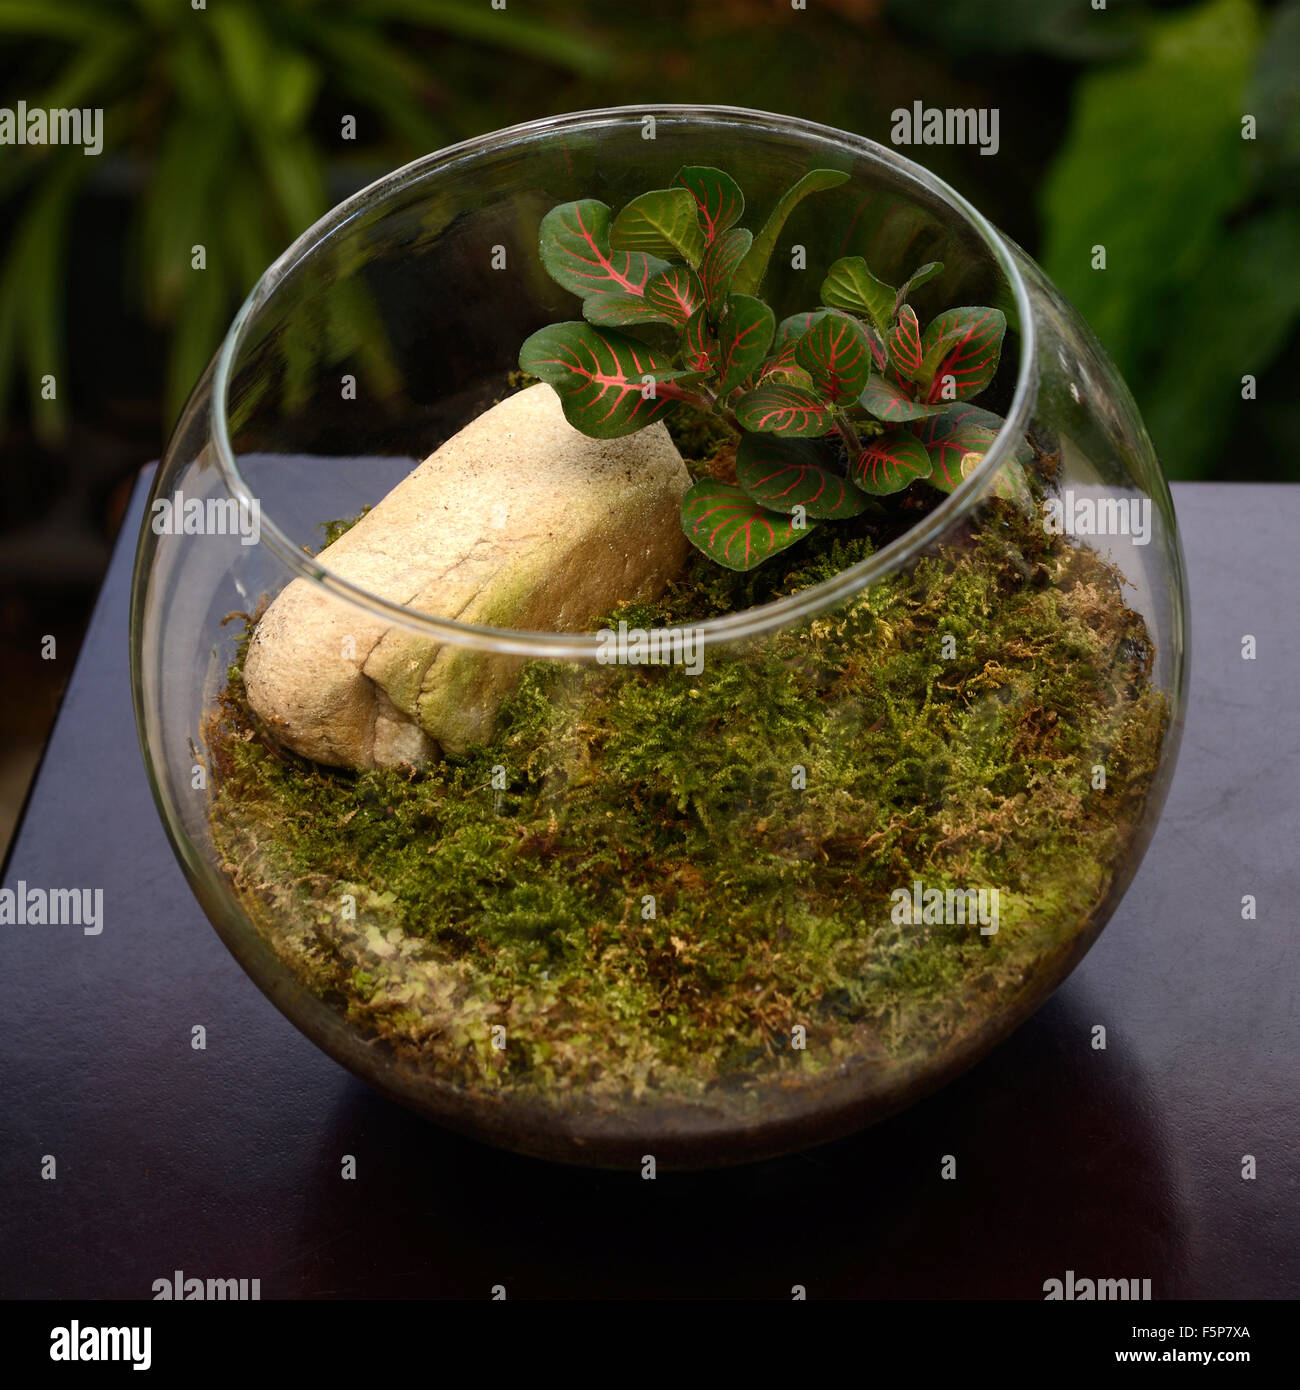 Terrarium, small garden in bottle, look so nice for home decoration. Stock Photo